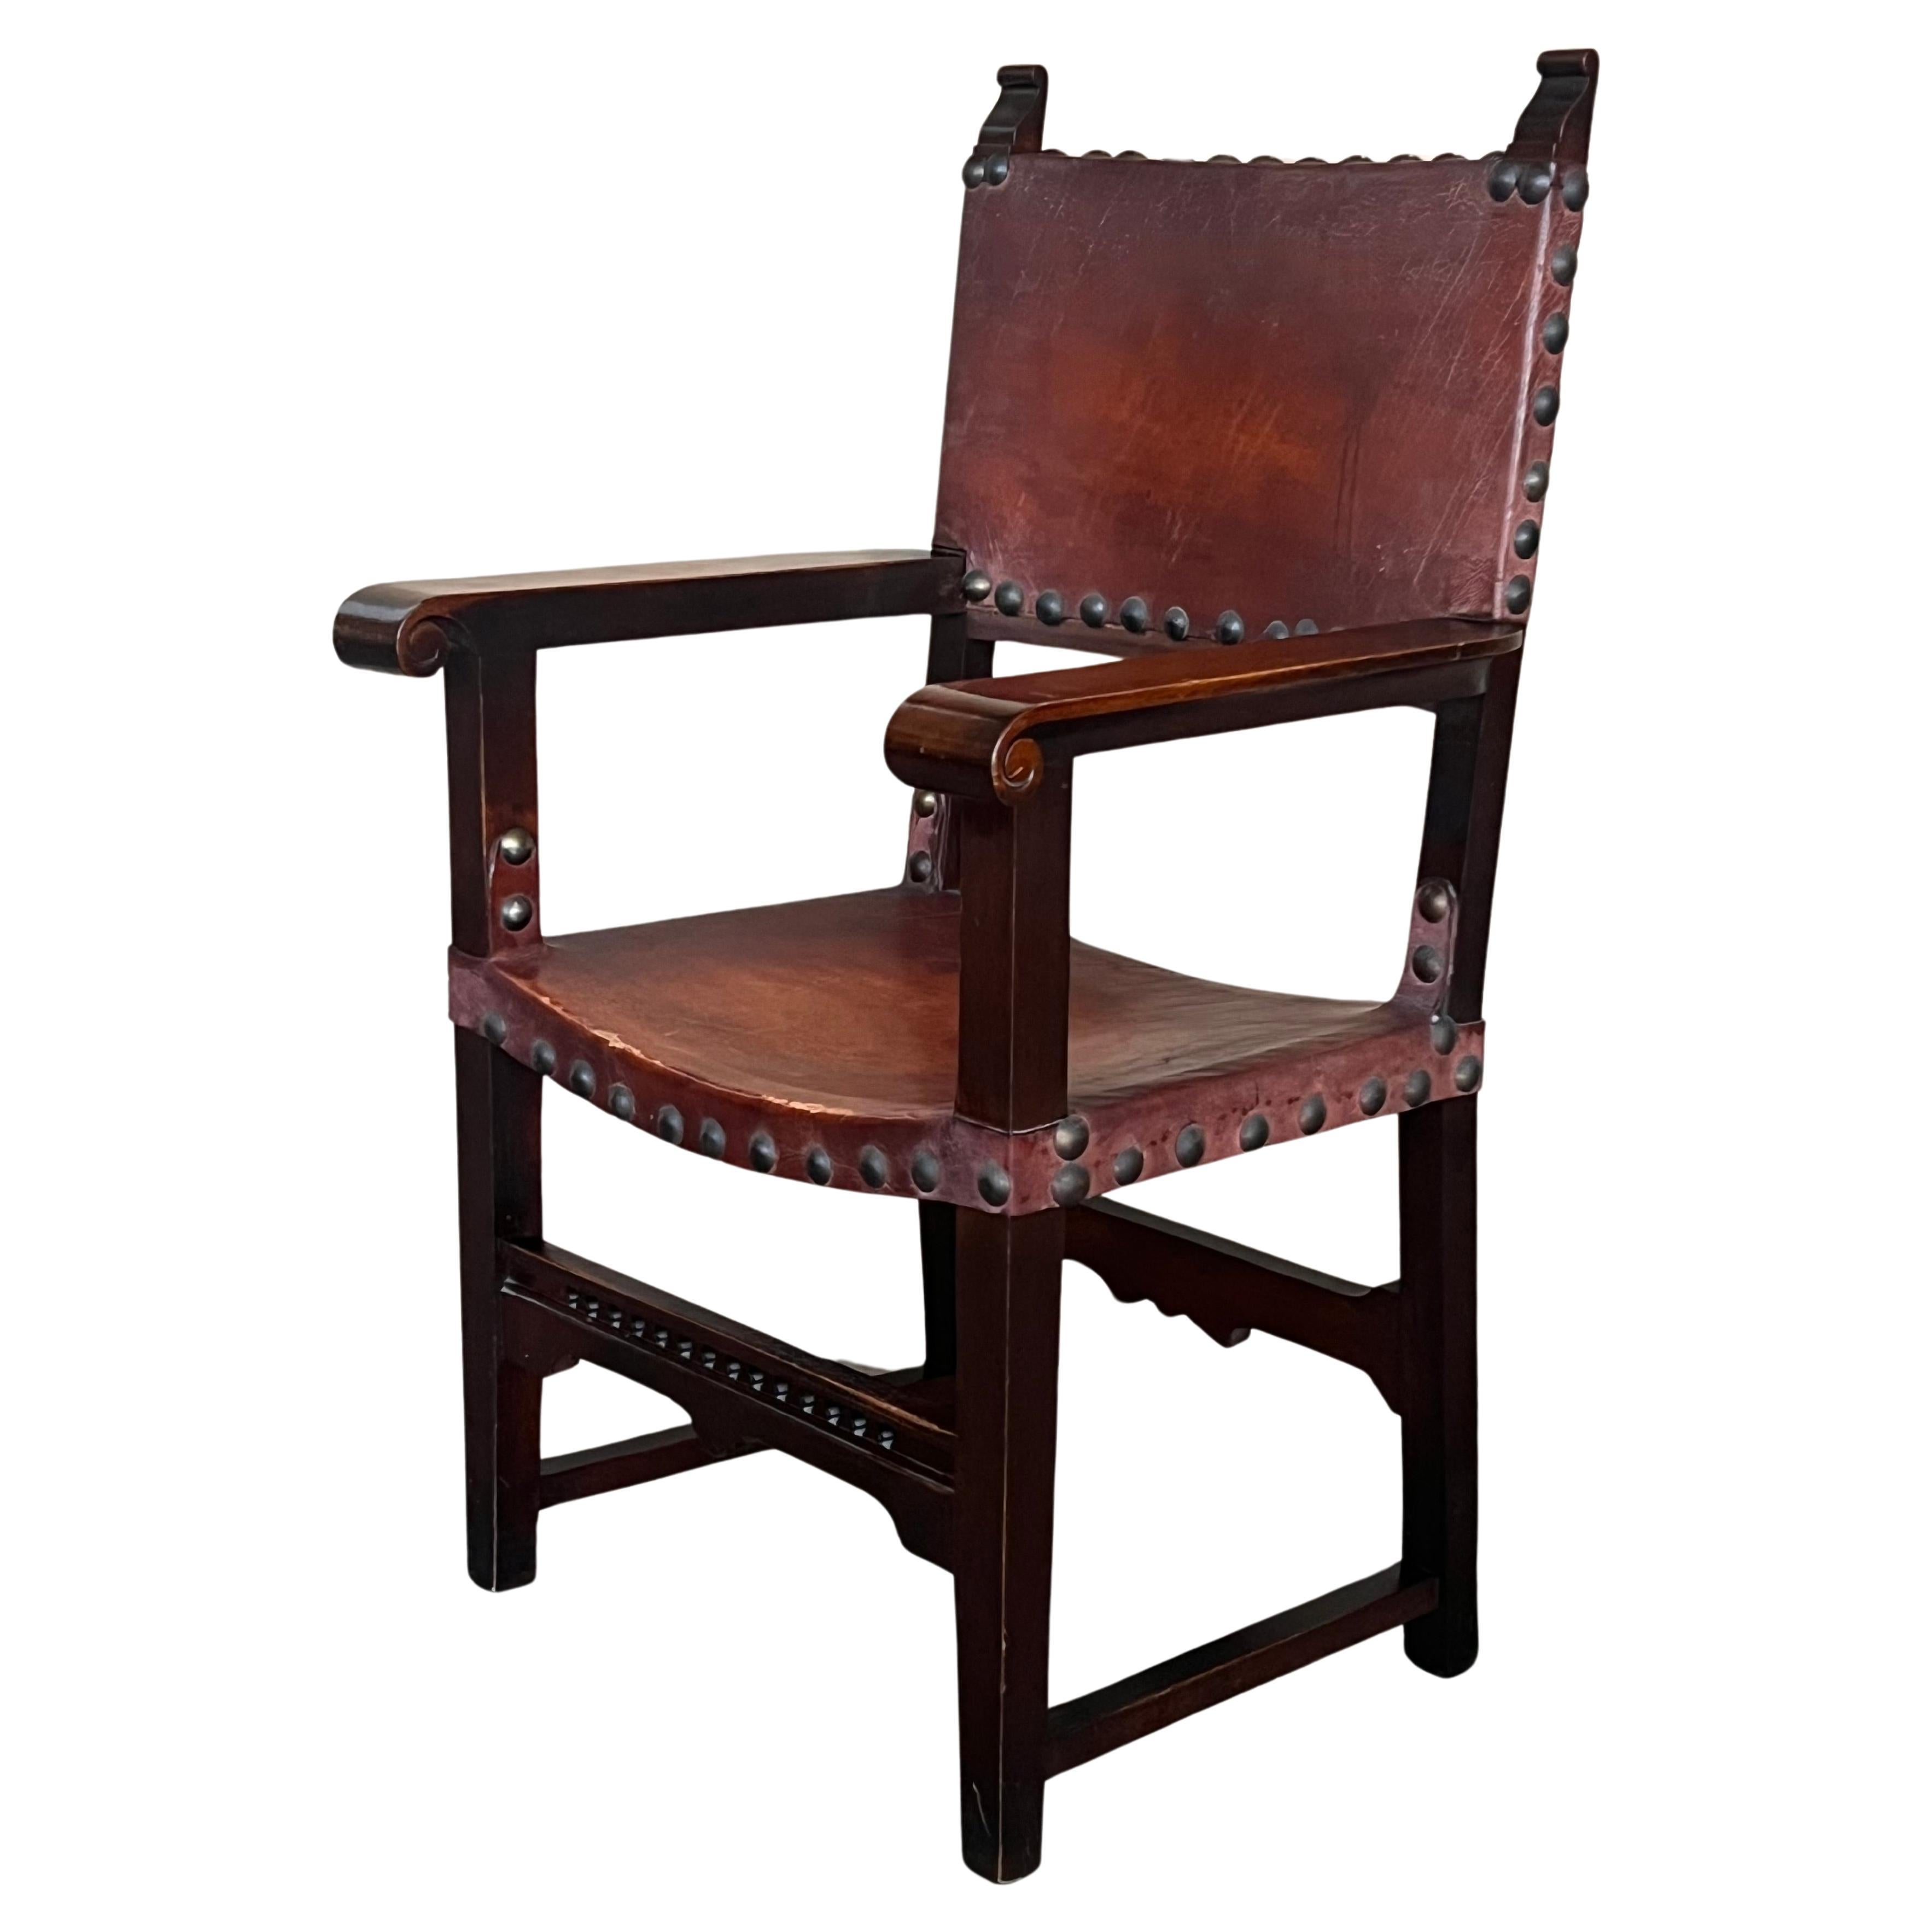 19th century Spanish colonial altar armchairs with wood seat with ornamental carved on the back and beautiful legs and armchairs. There are a very resistant and heavy armchairs.

Measures: Height to arms  77 cm